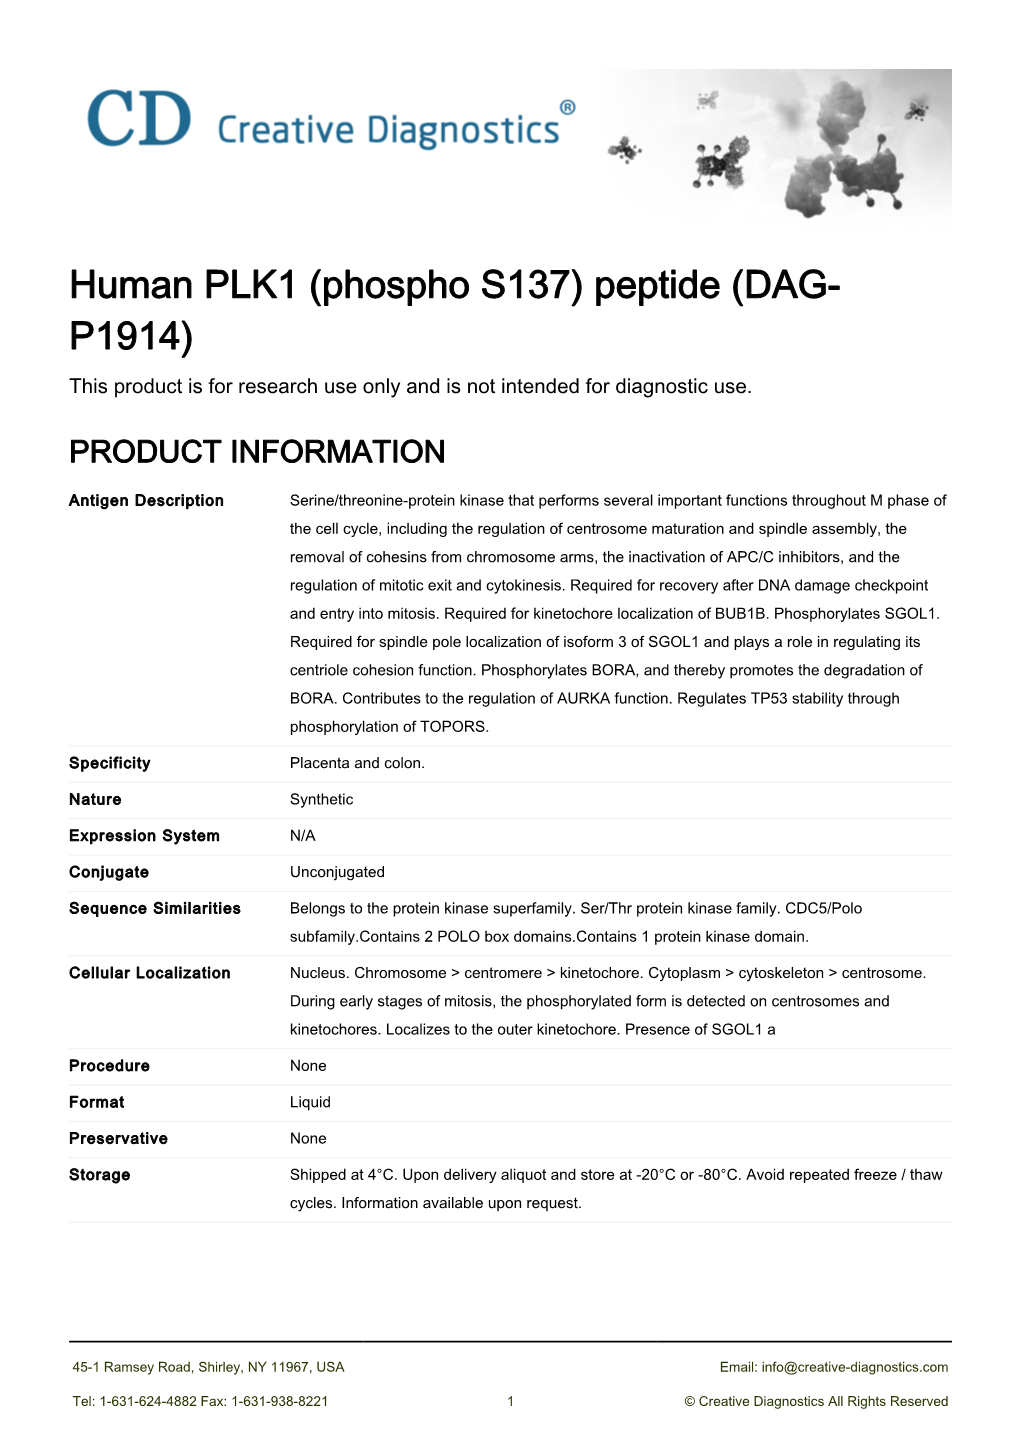 Human PLK1 (Phospho S137) Peptide (DAG- P1914) This Product Is for Research Use Only and Is Not Intended for Diagnostic Use